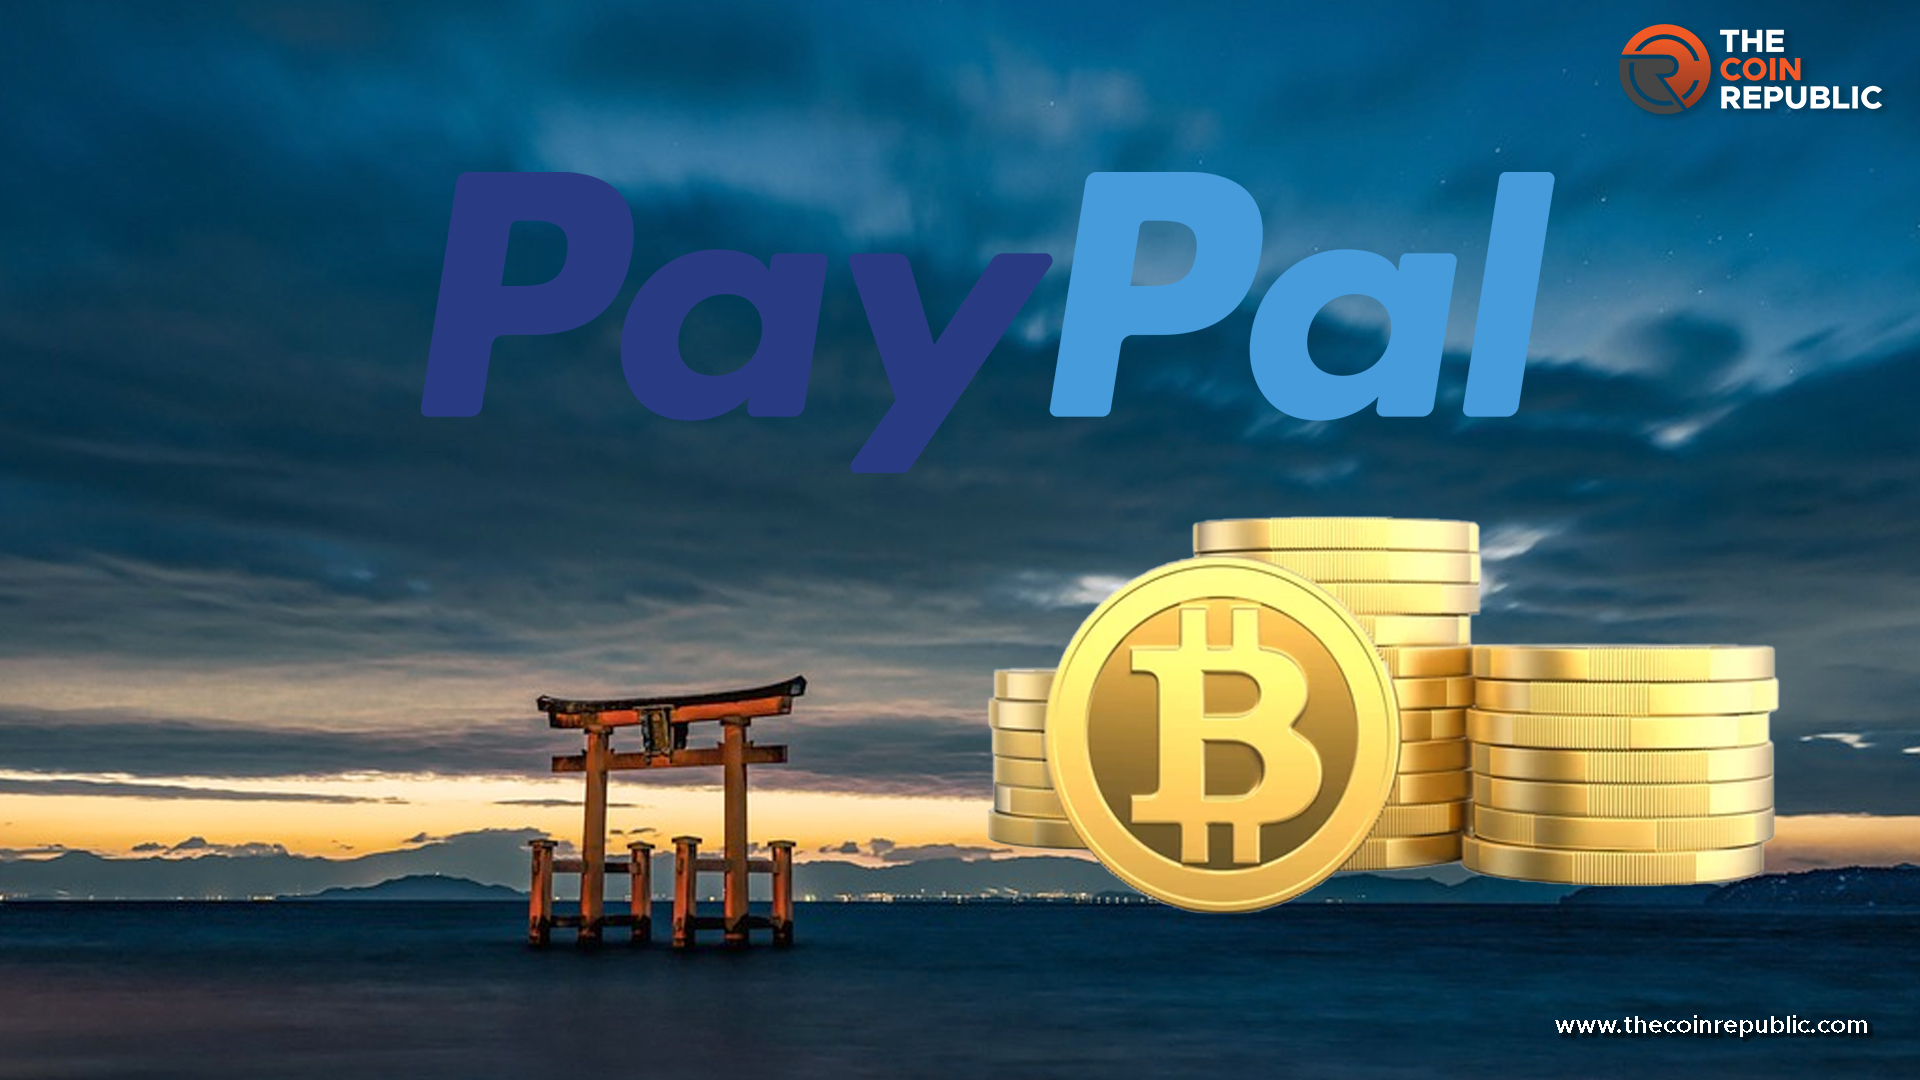 Crypto with PayPal is Finally here, Find here The Details